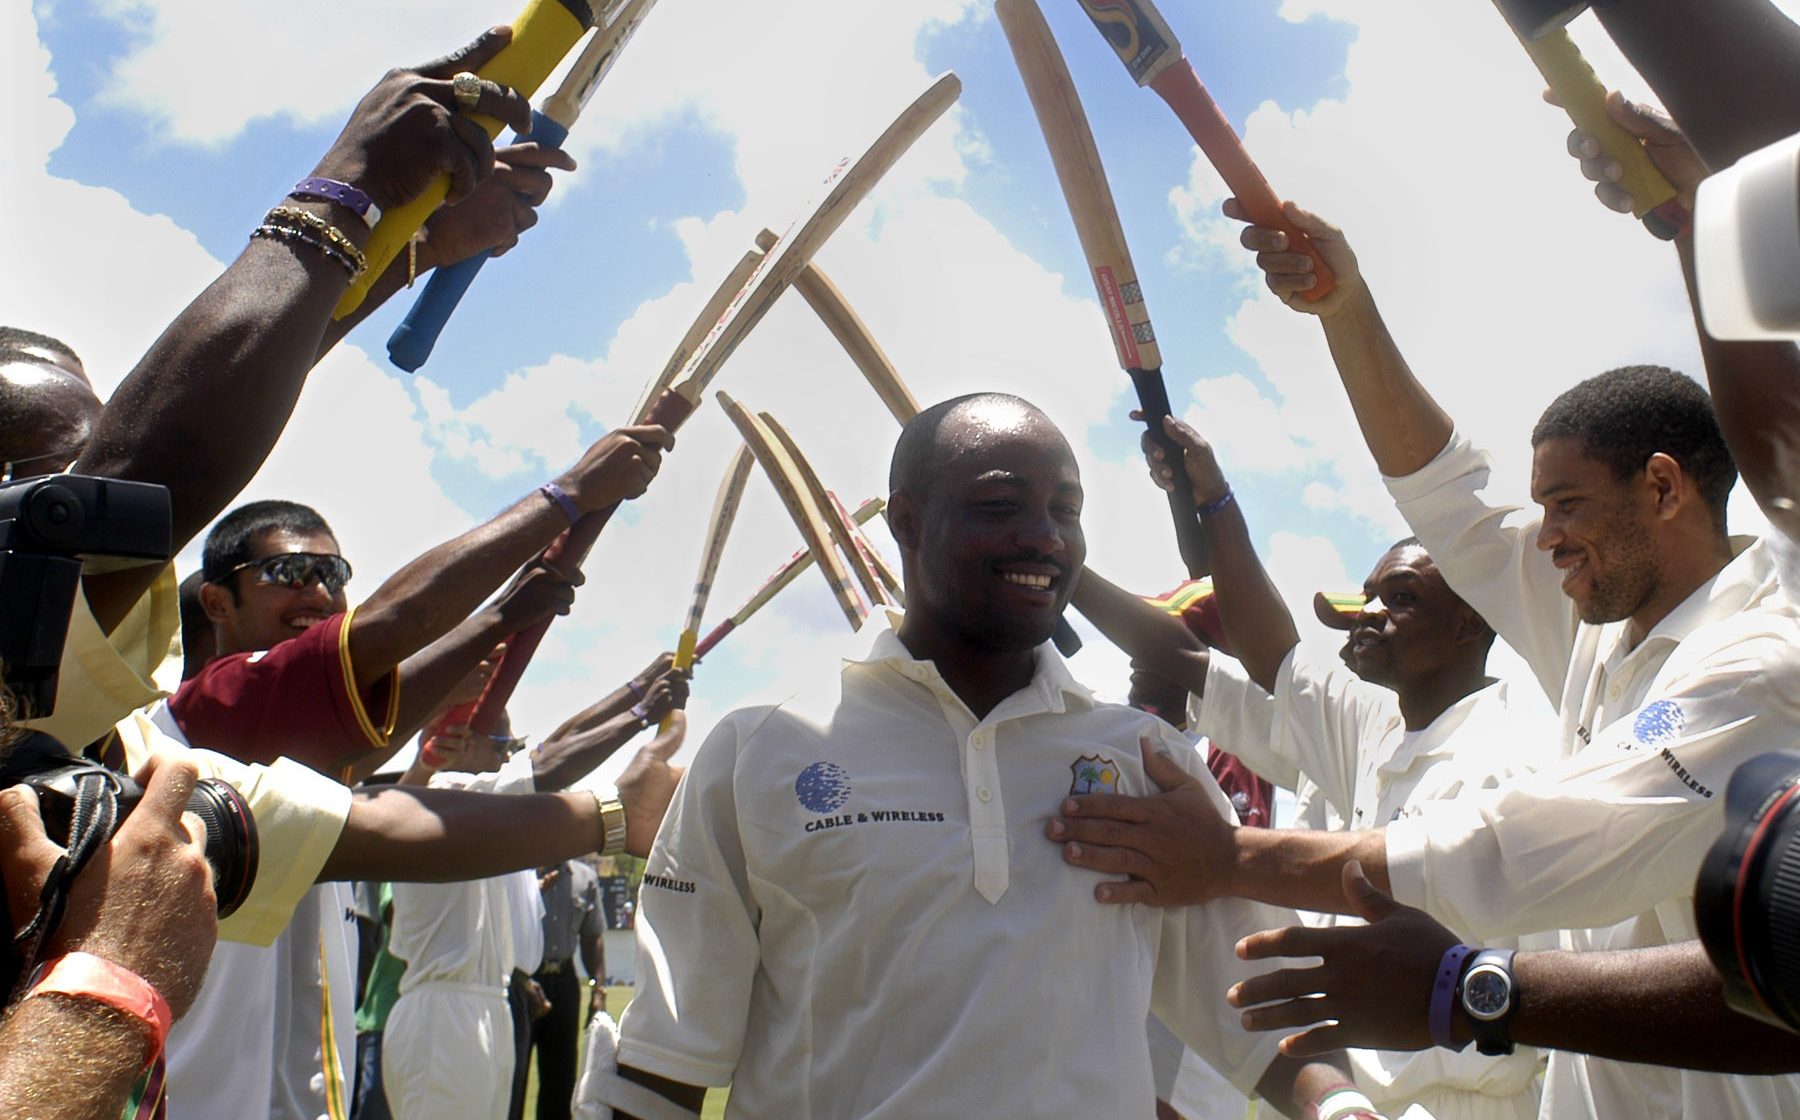 brian lara’s 400* was historic, but so selfish i left the ground